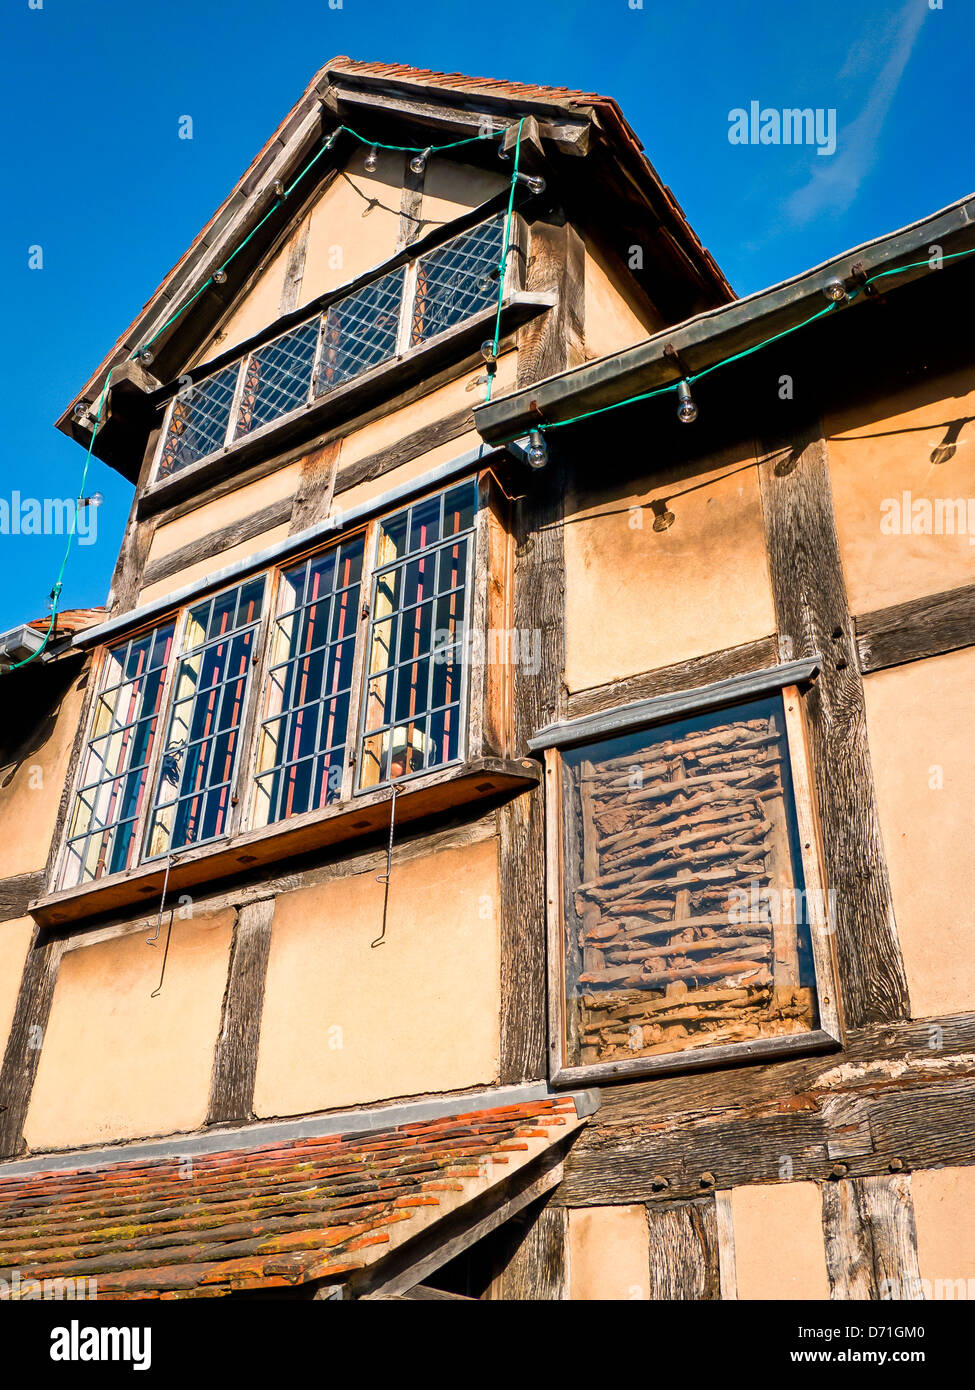 Detail of William Shakespeare's birthplace showing historic building construction method Stock Photo